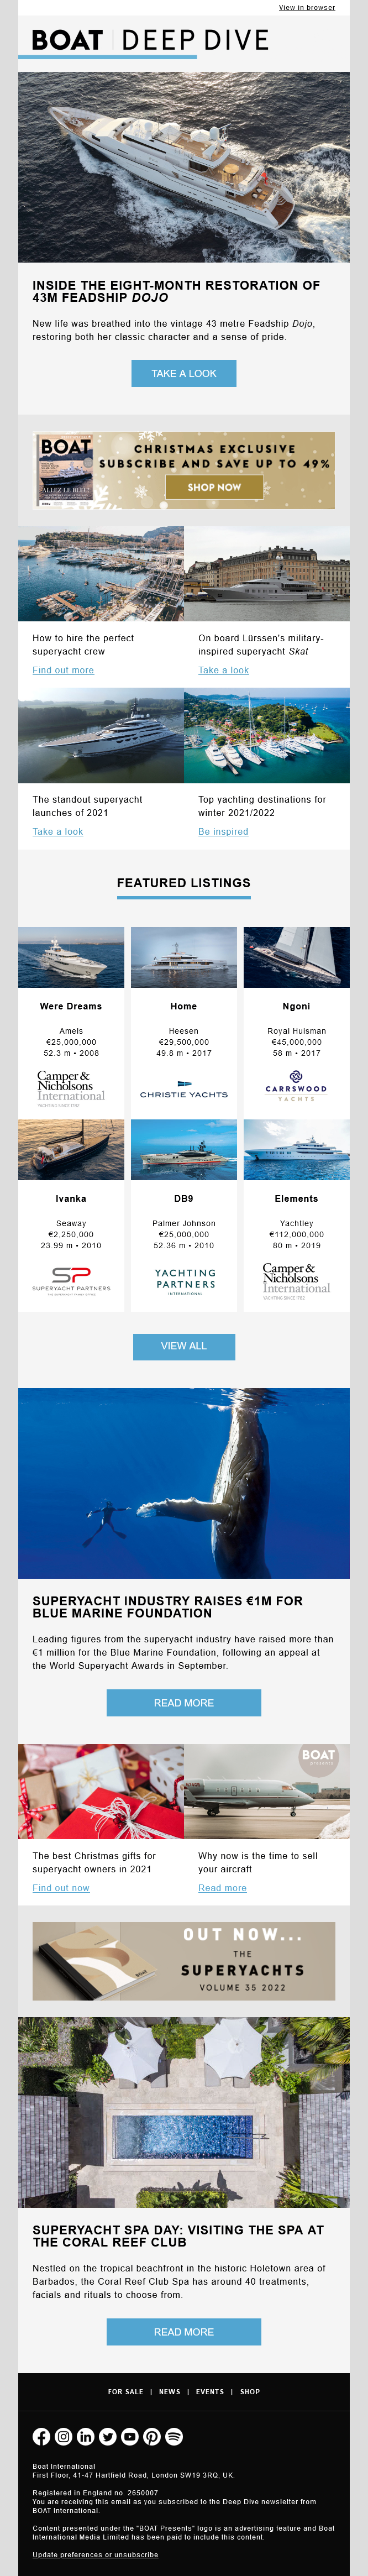 Email Templates Created For Boat International Marketing Life Style desktop design